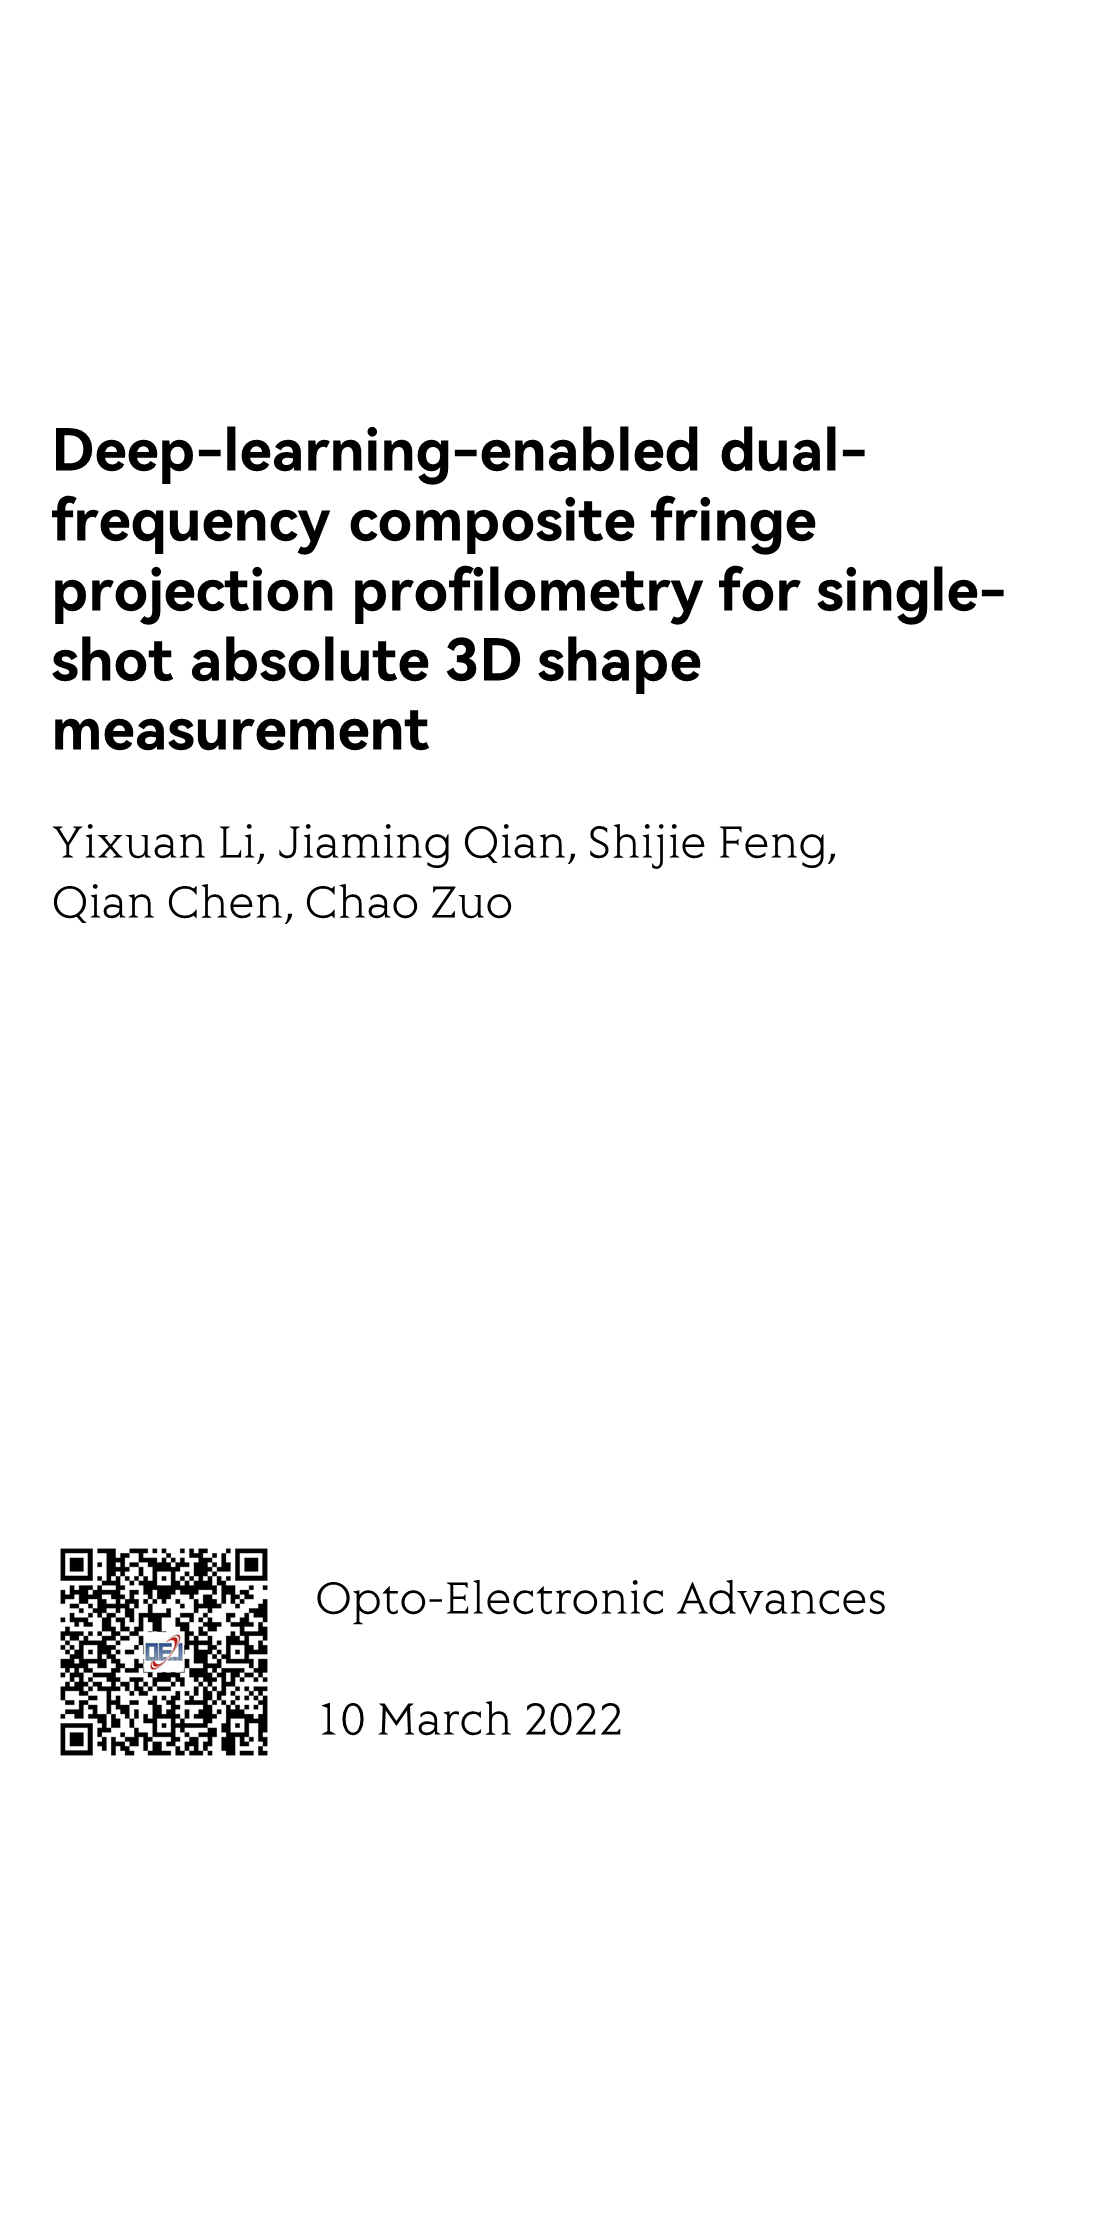 Deep-learning-enabled dual-frequency composite fringe projection profilometry for single-shot absolute 3D shape measurement_1